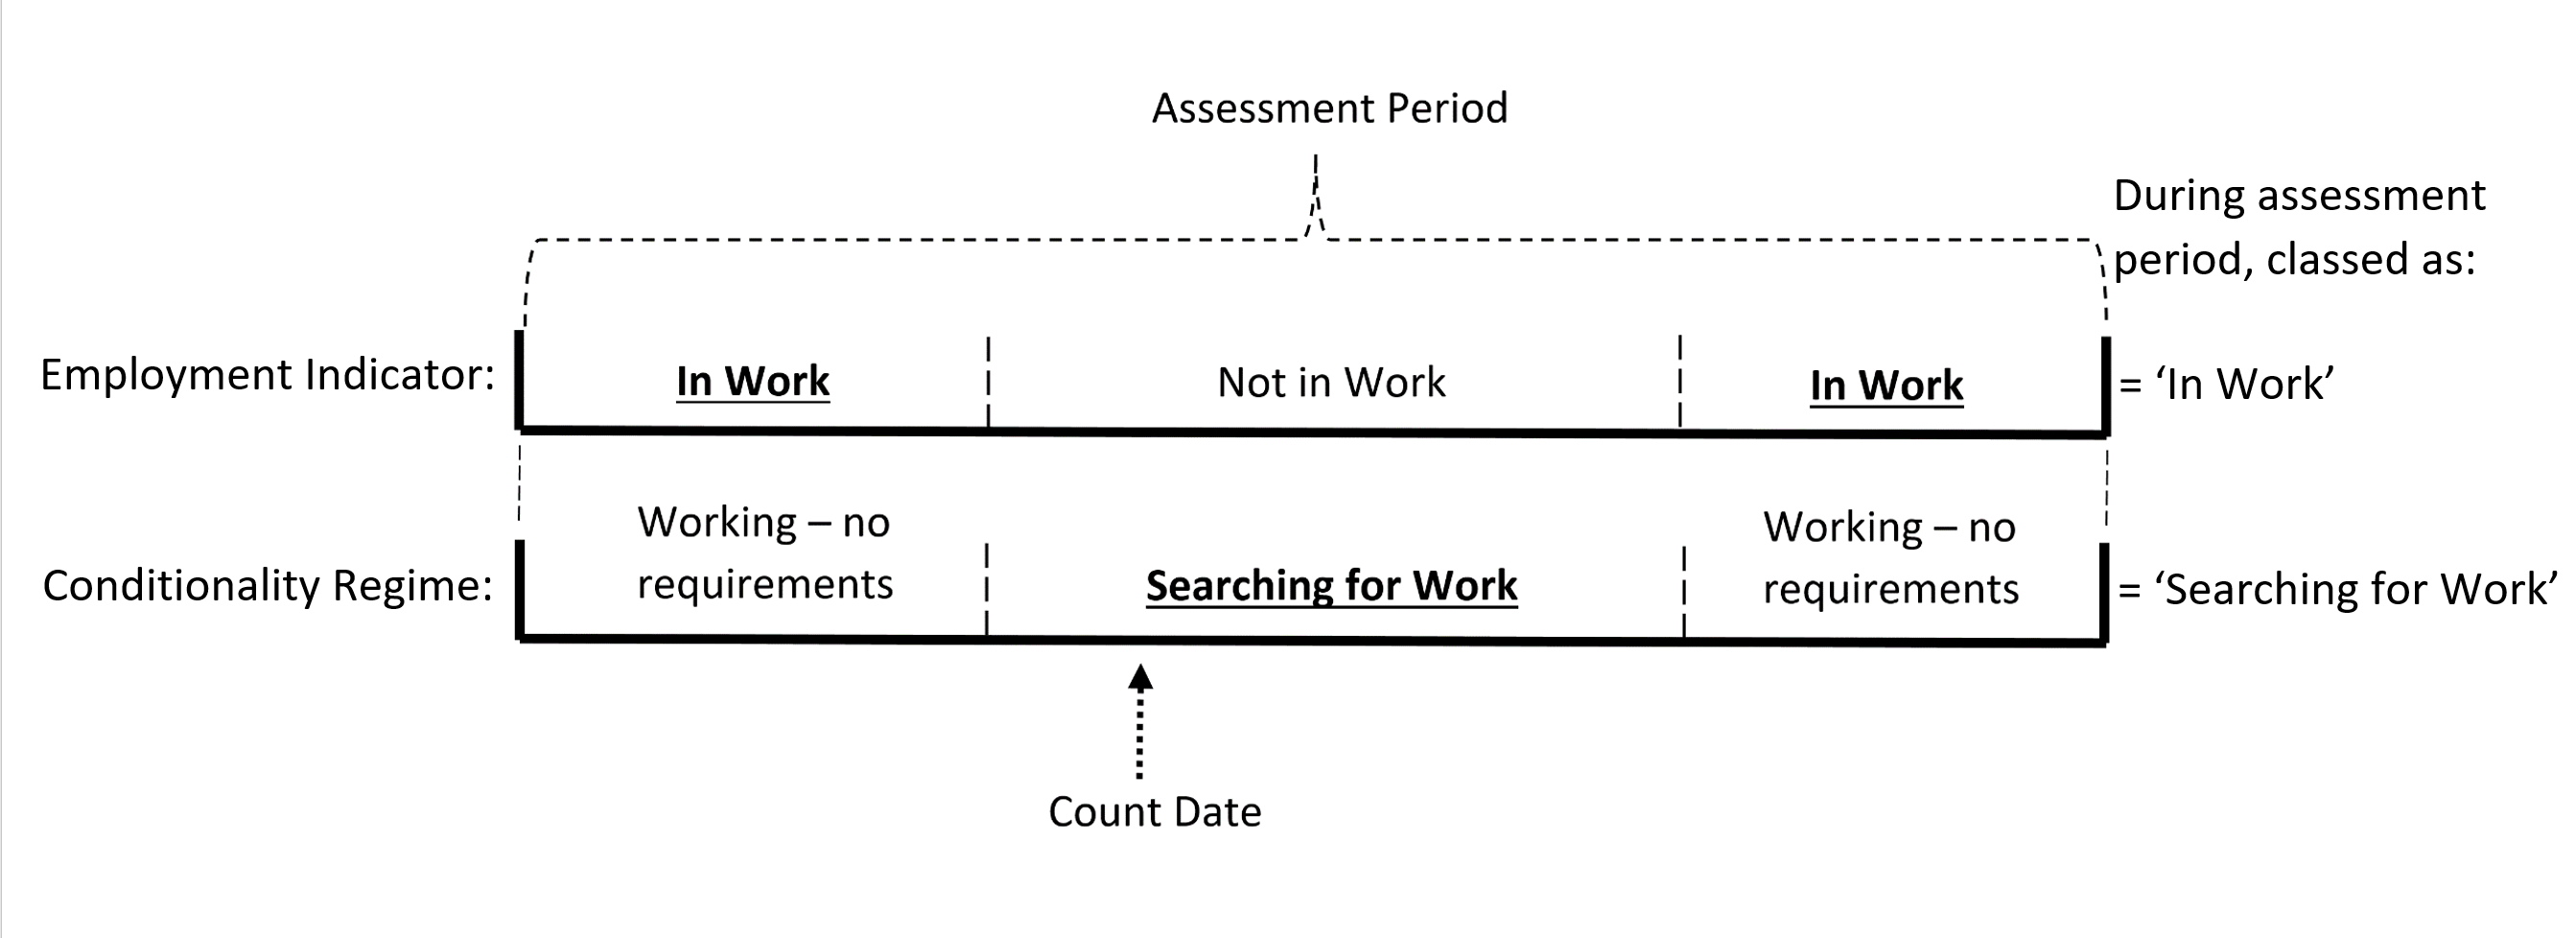 A diagram showing an example for the Employment Indicator